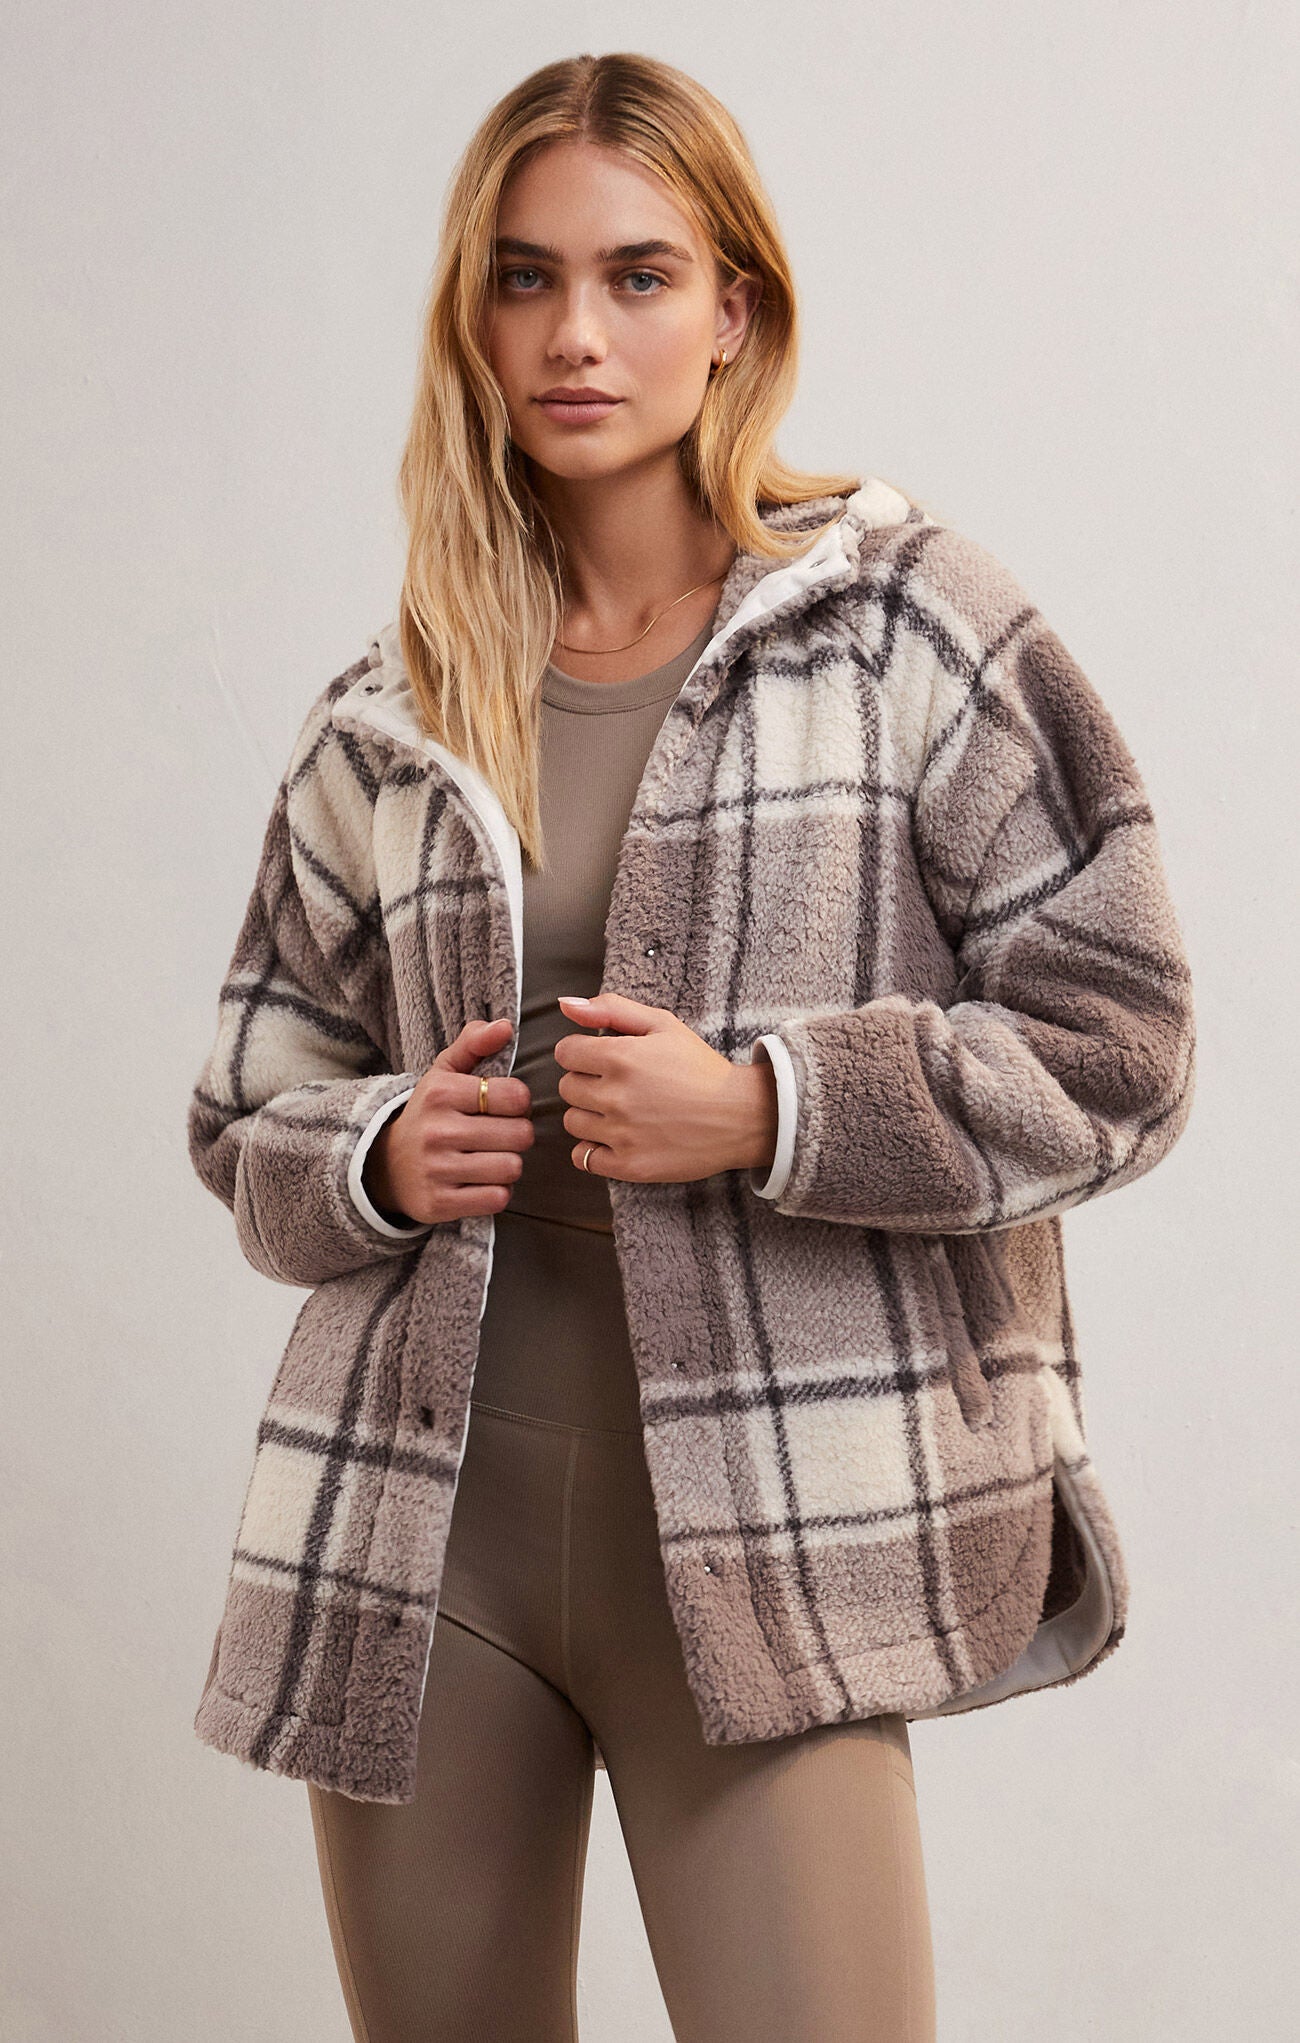 Cross Country Plaid Jacket